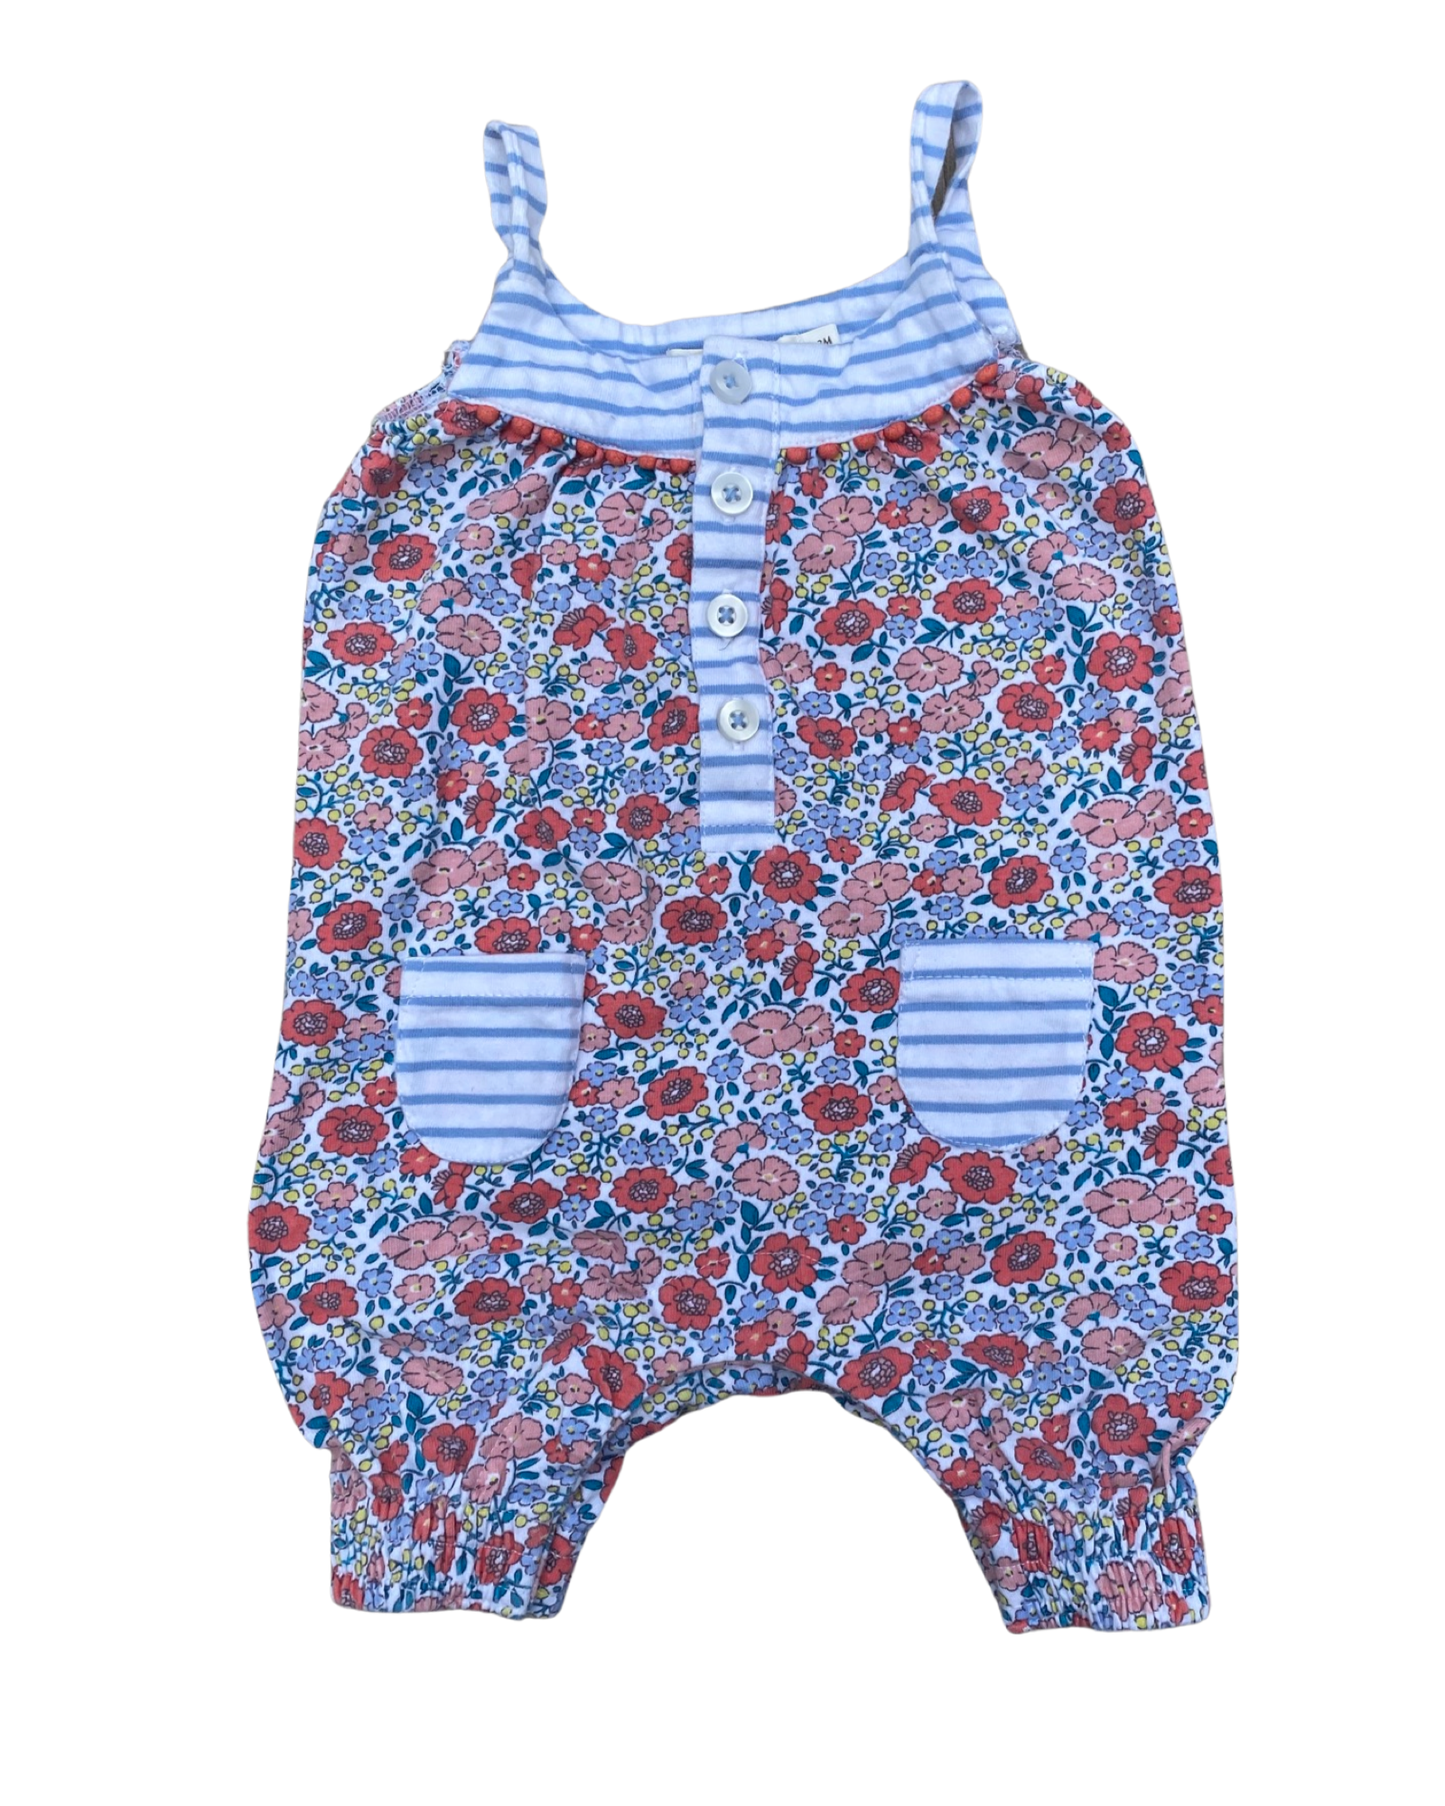 Baby Boden floral/stripe printed jersey strappy romper (0-3mths)